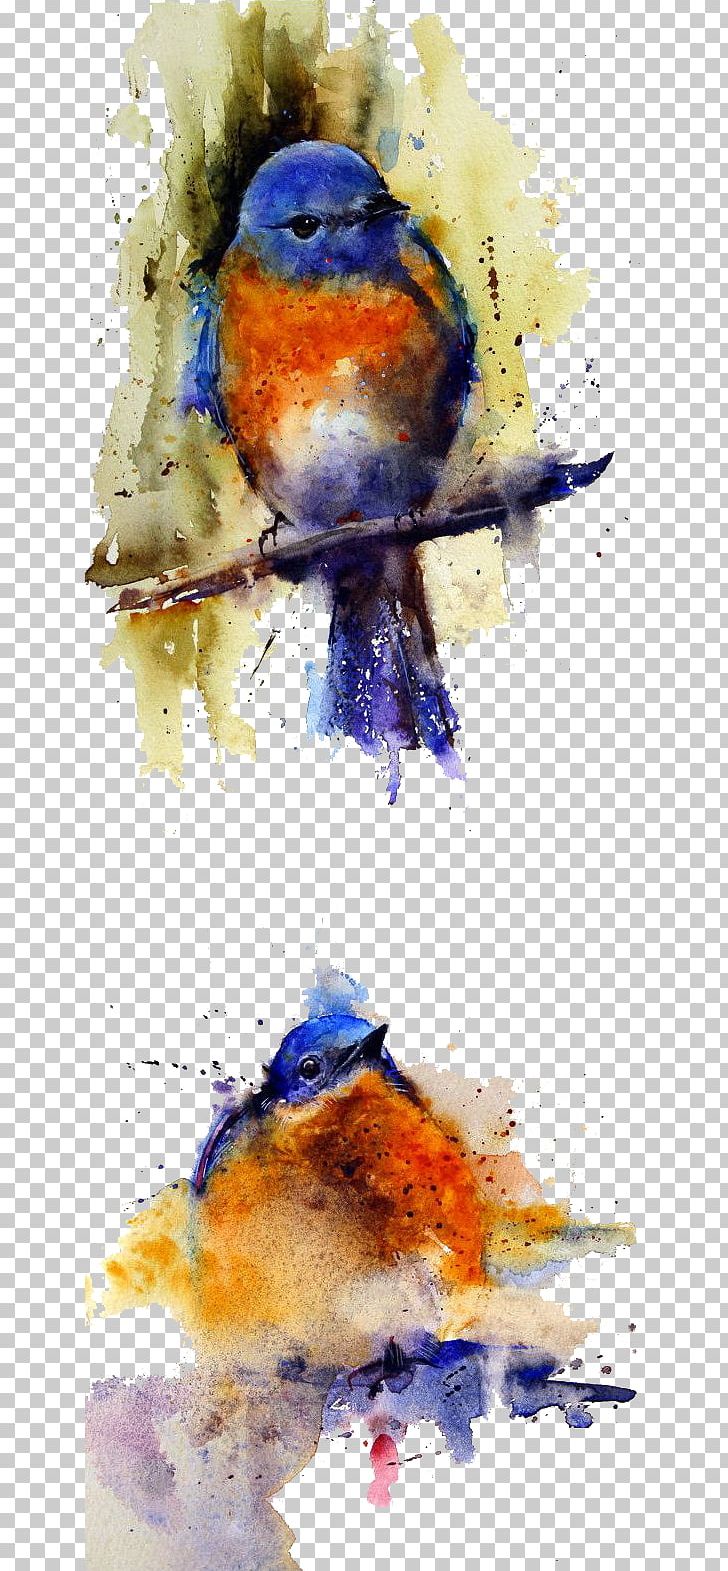 Watercolor: Animals Watercolor Painting Artist Oil Painting PNG, Clipart, Art, Branches, Canvas, Canvas Print, Closeup Free PNG Download